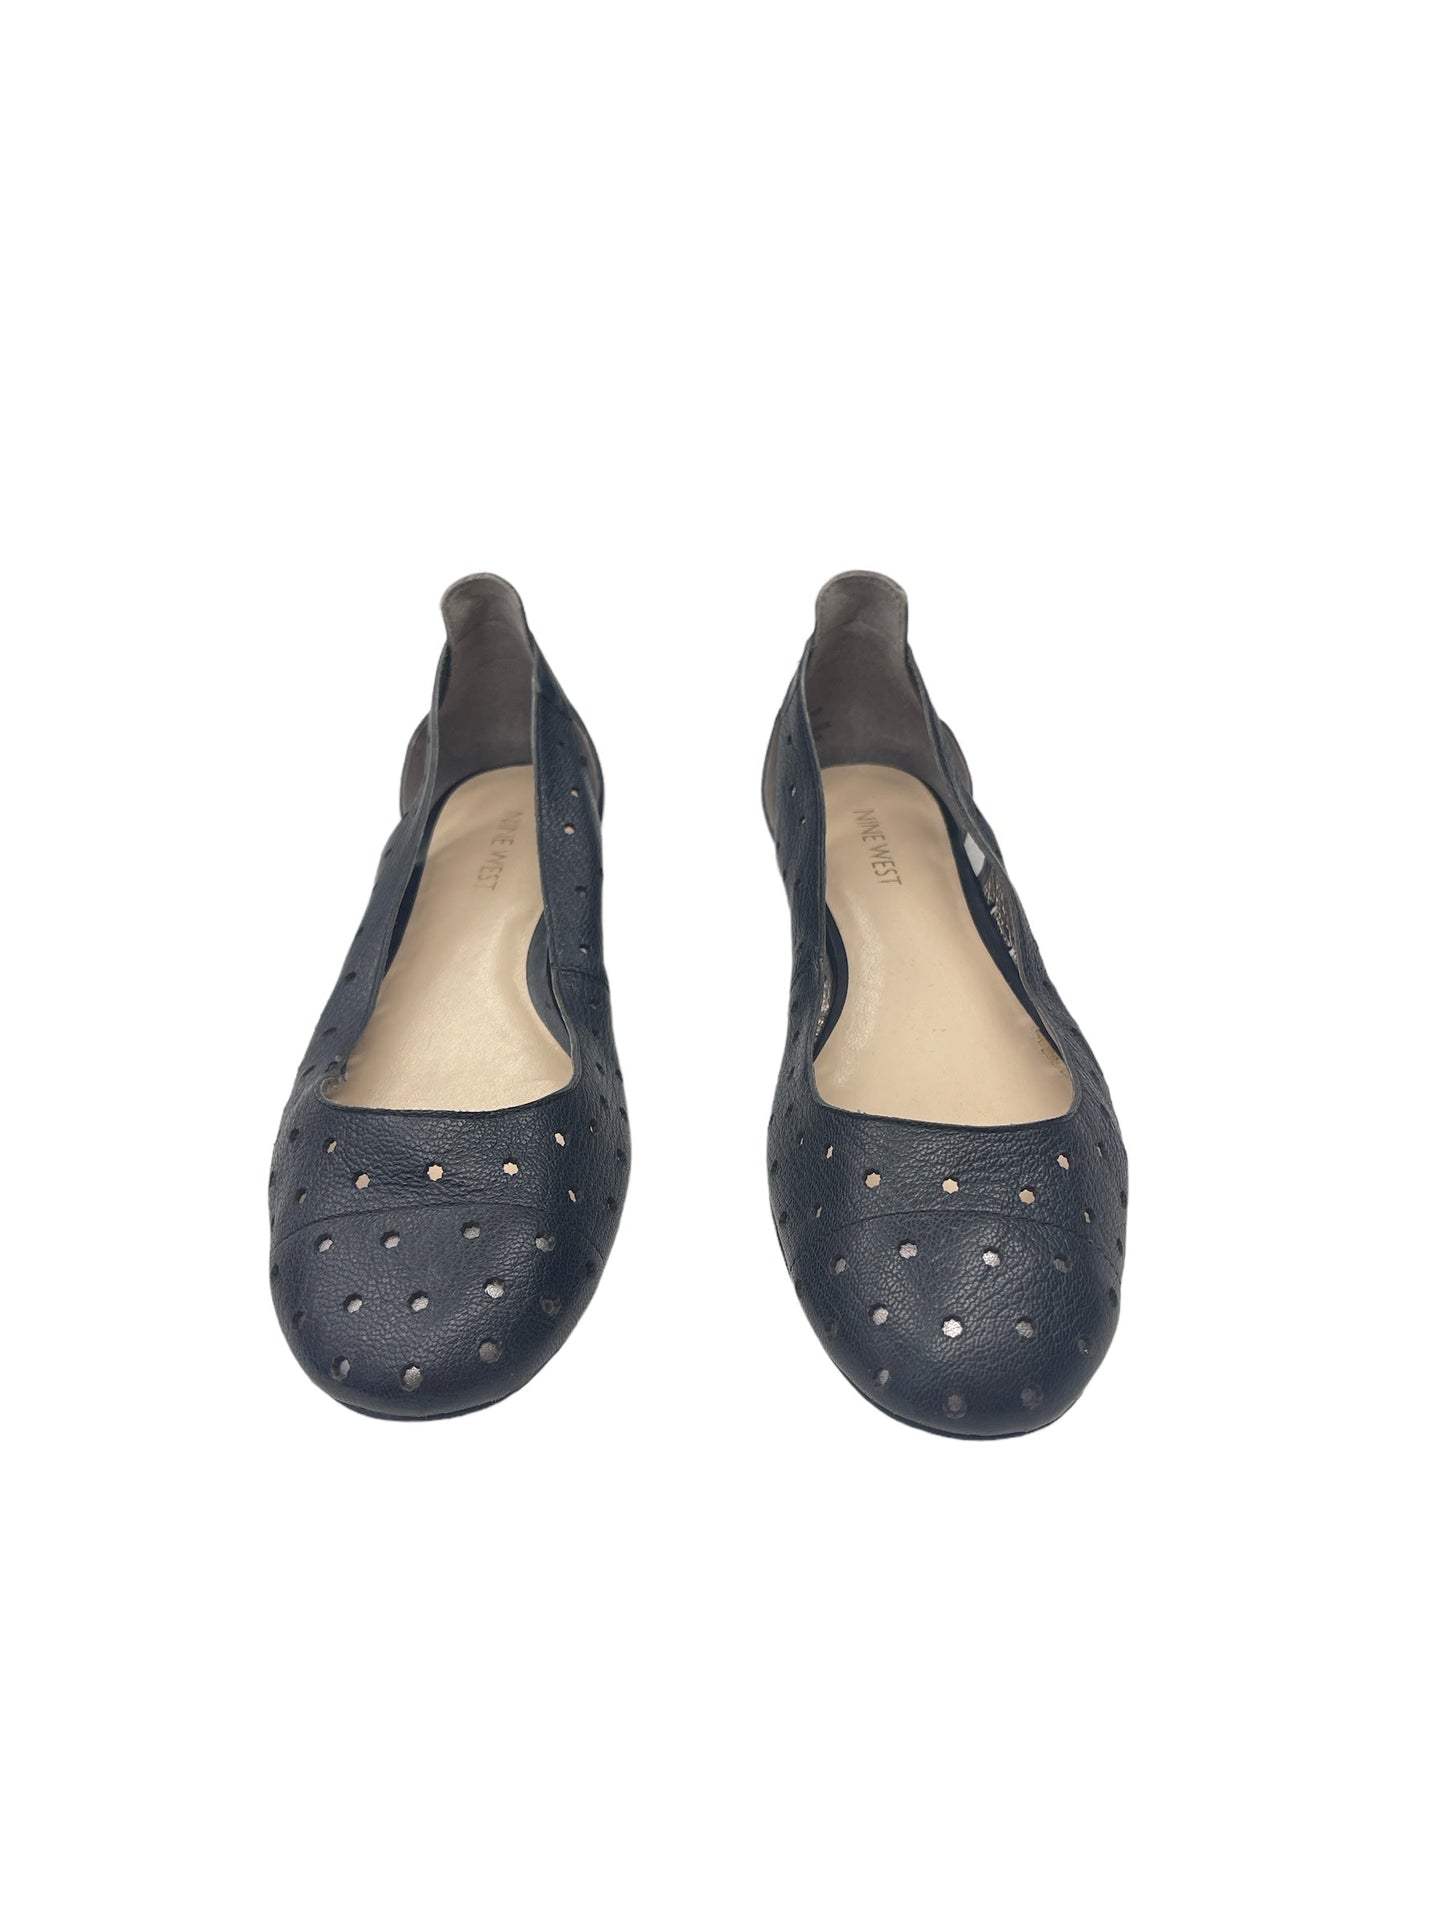 Shoes Flats By Nine West  Size: 8